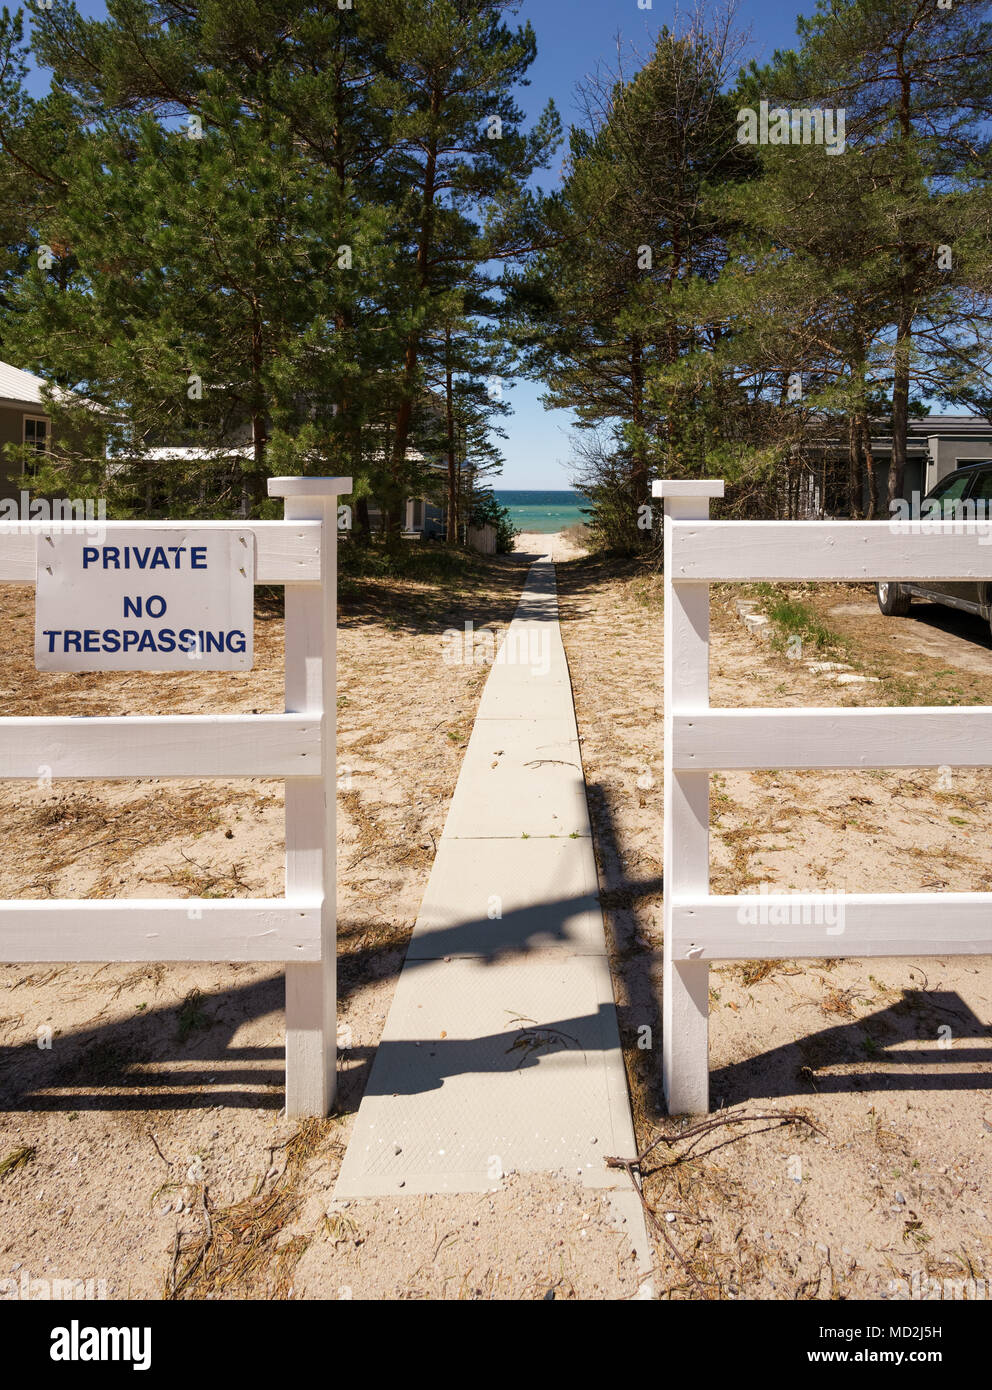 No trespassing sign on fence by footpath leading to sea, Ontario, Canada Stock Photo